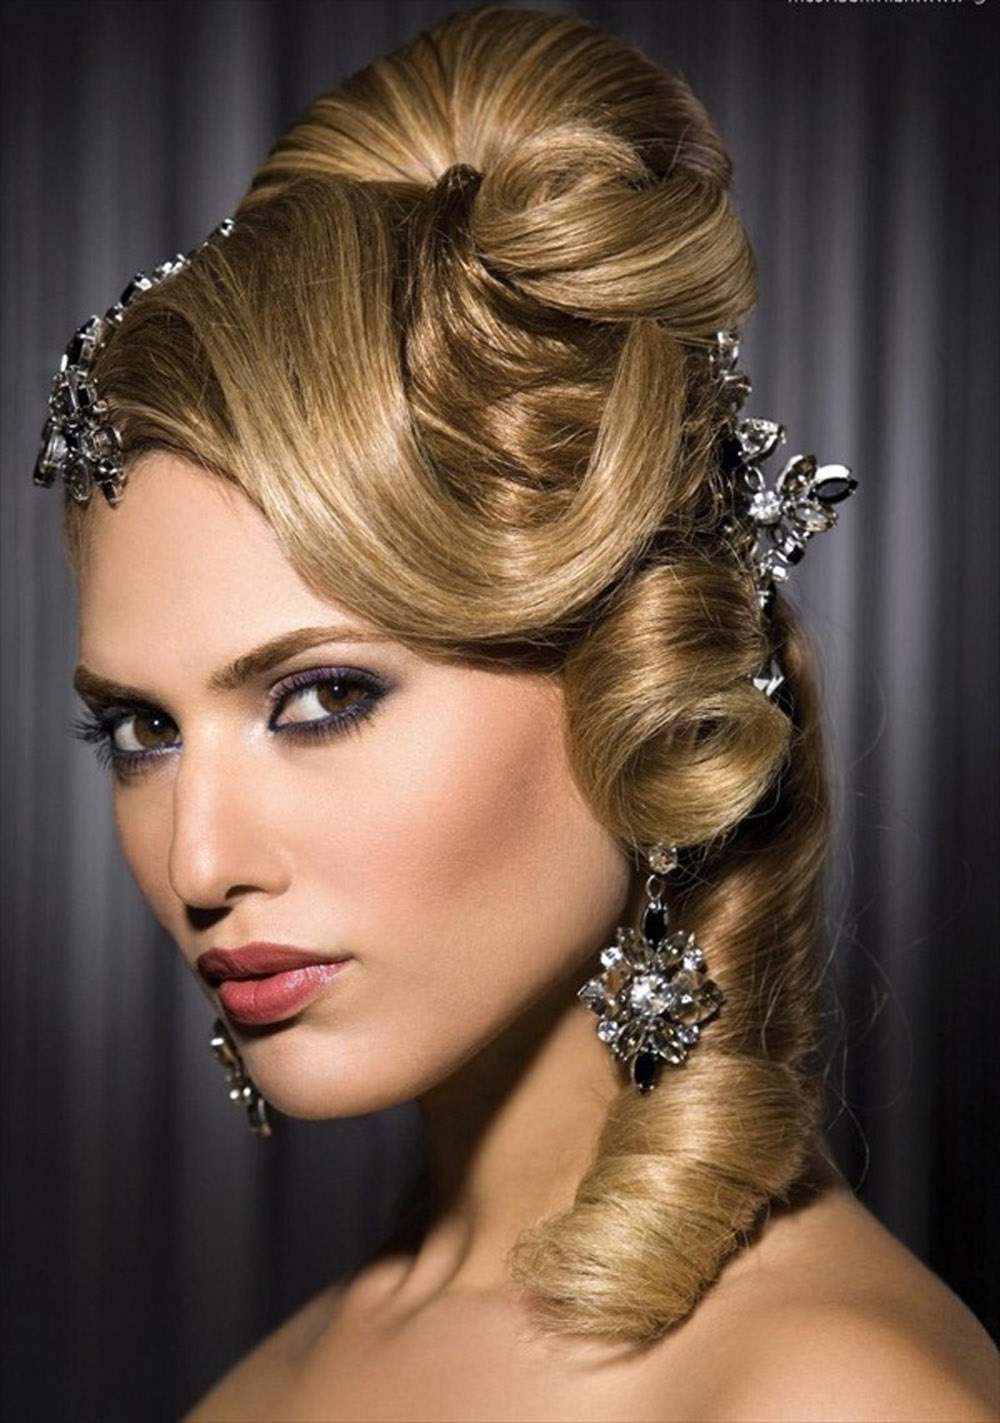 Princess Prom Hairstyles for Long Hair